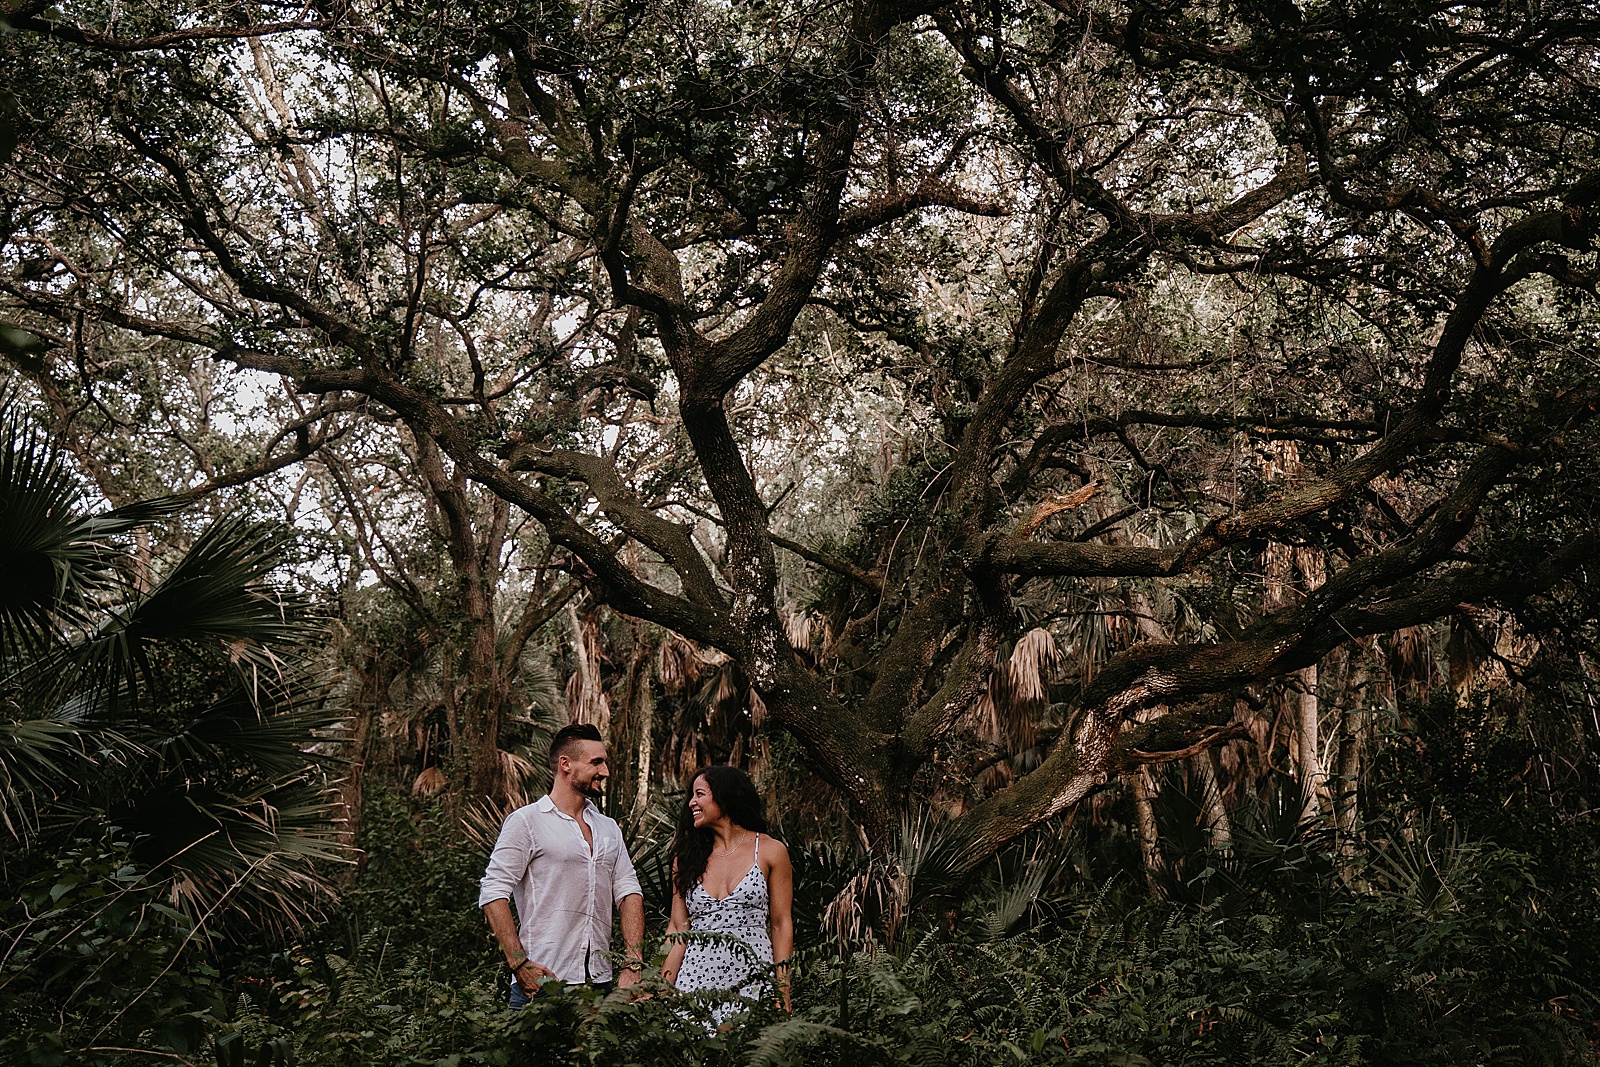 Delray Oaks Engagement Session captured by West Palm Beach Engagement Photographer, Krystal Capone Photography